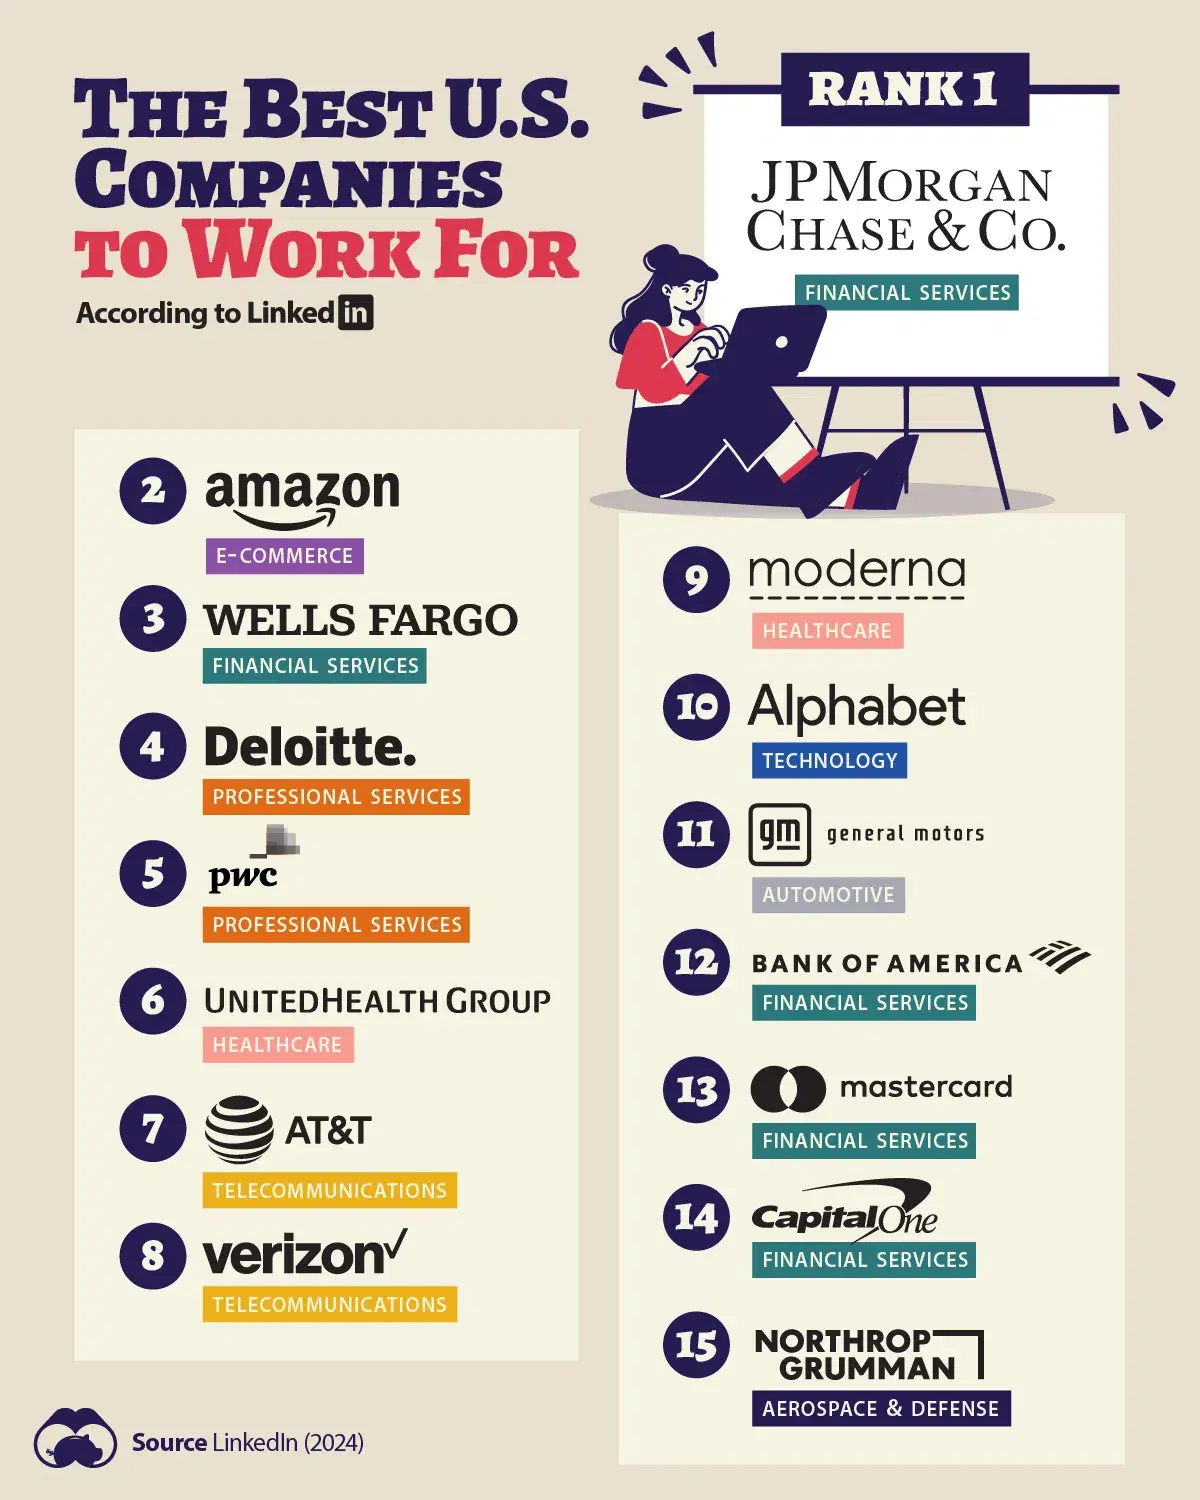 Banks Dominate the List of U.S. Best Companies to Work for in 2024